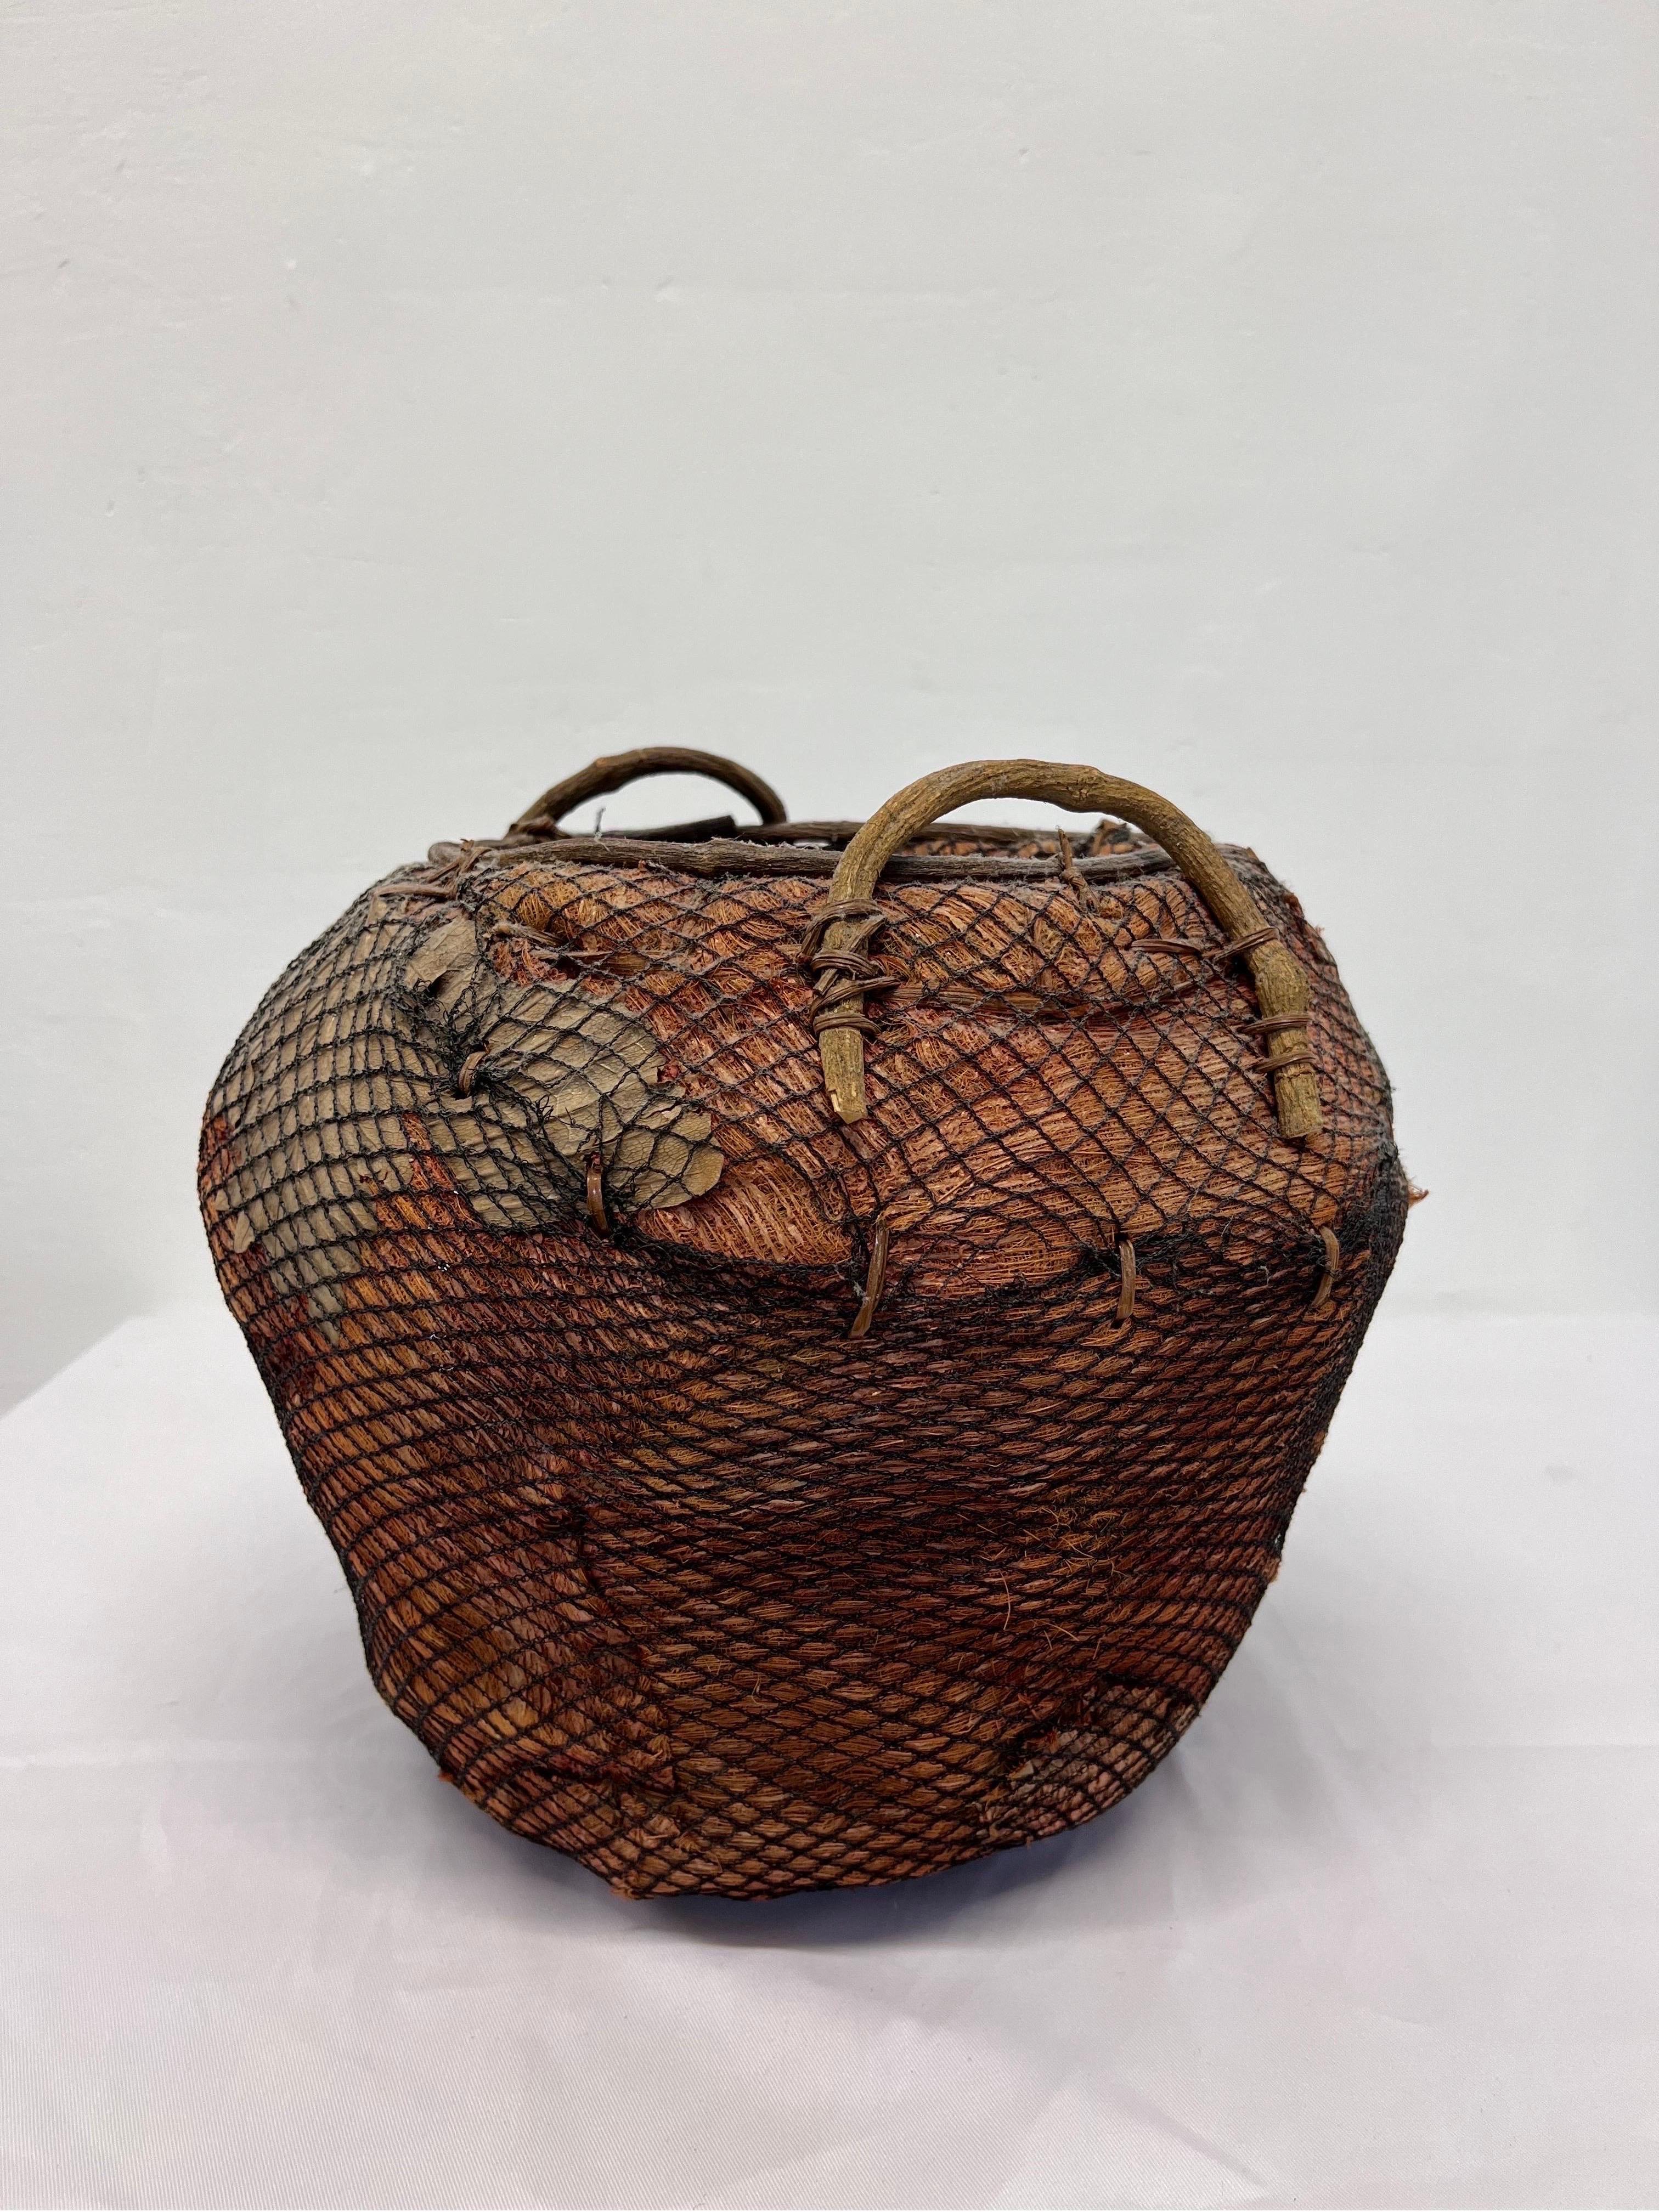 20th Century Handmade Natural Fiber and Leaf Basket Wrapped in Fish Net, 1970s For Sale